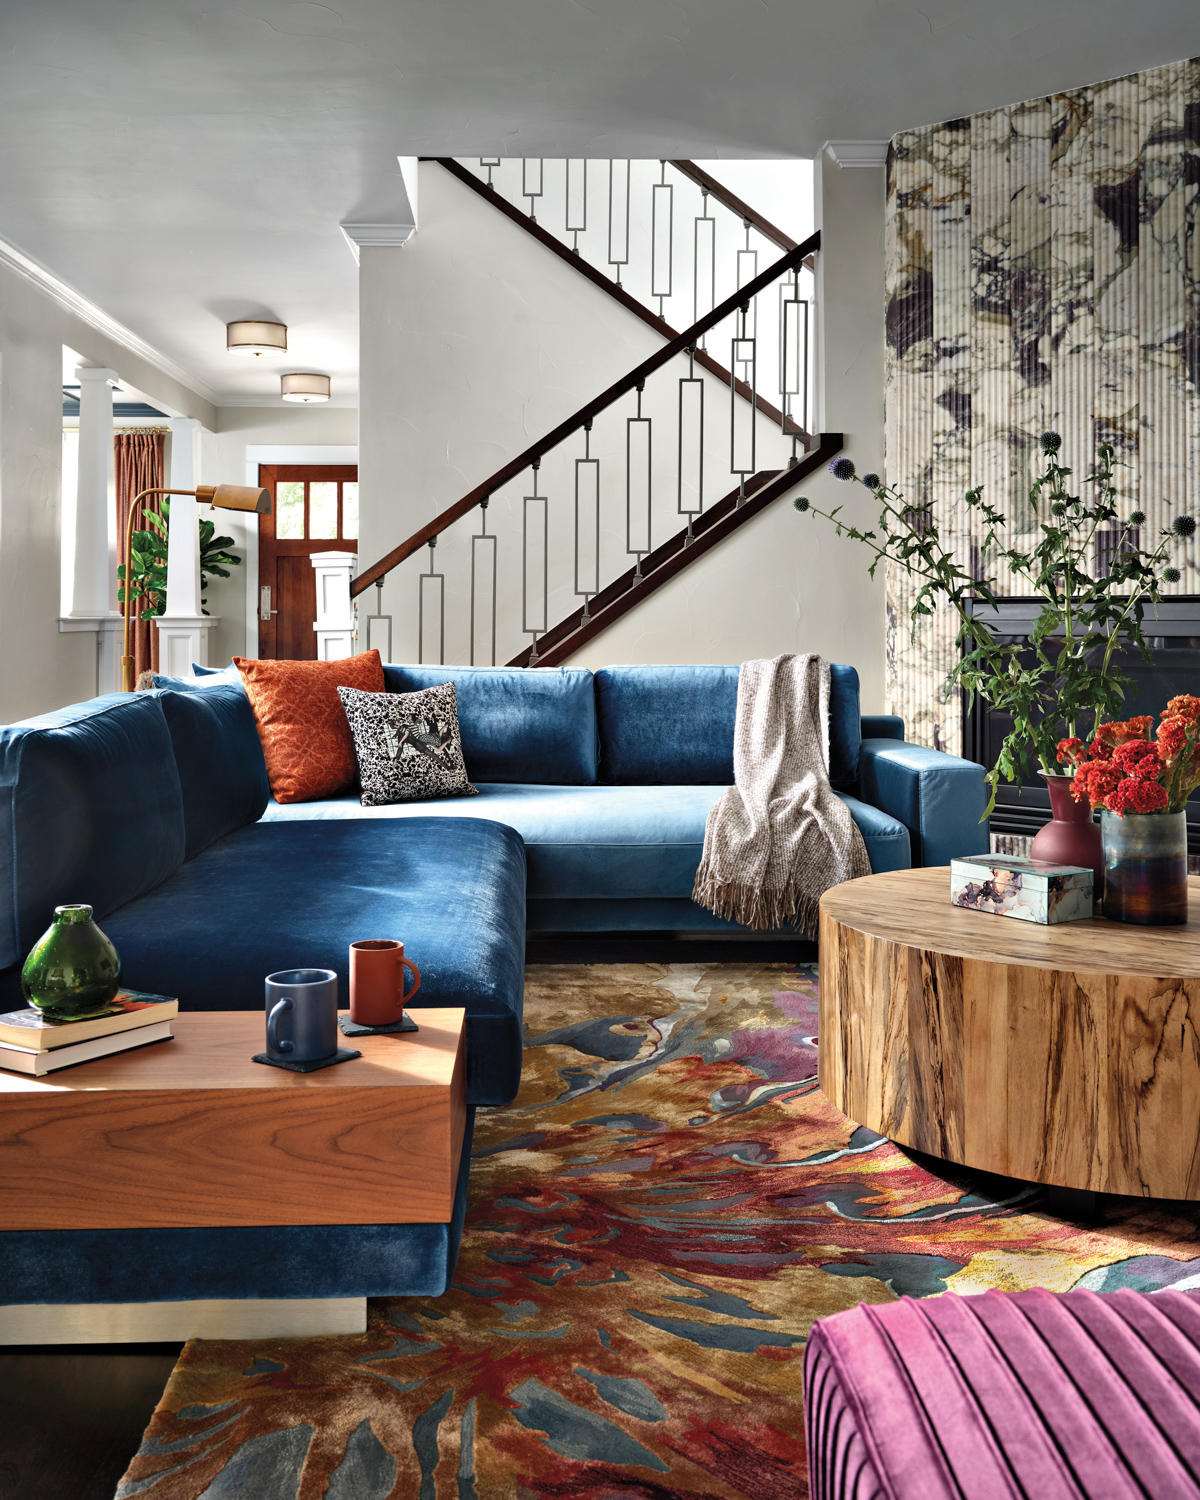 Bold Colors, Textures And Patterns Brighten A Denver Home